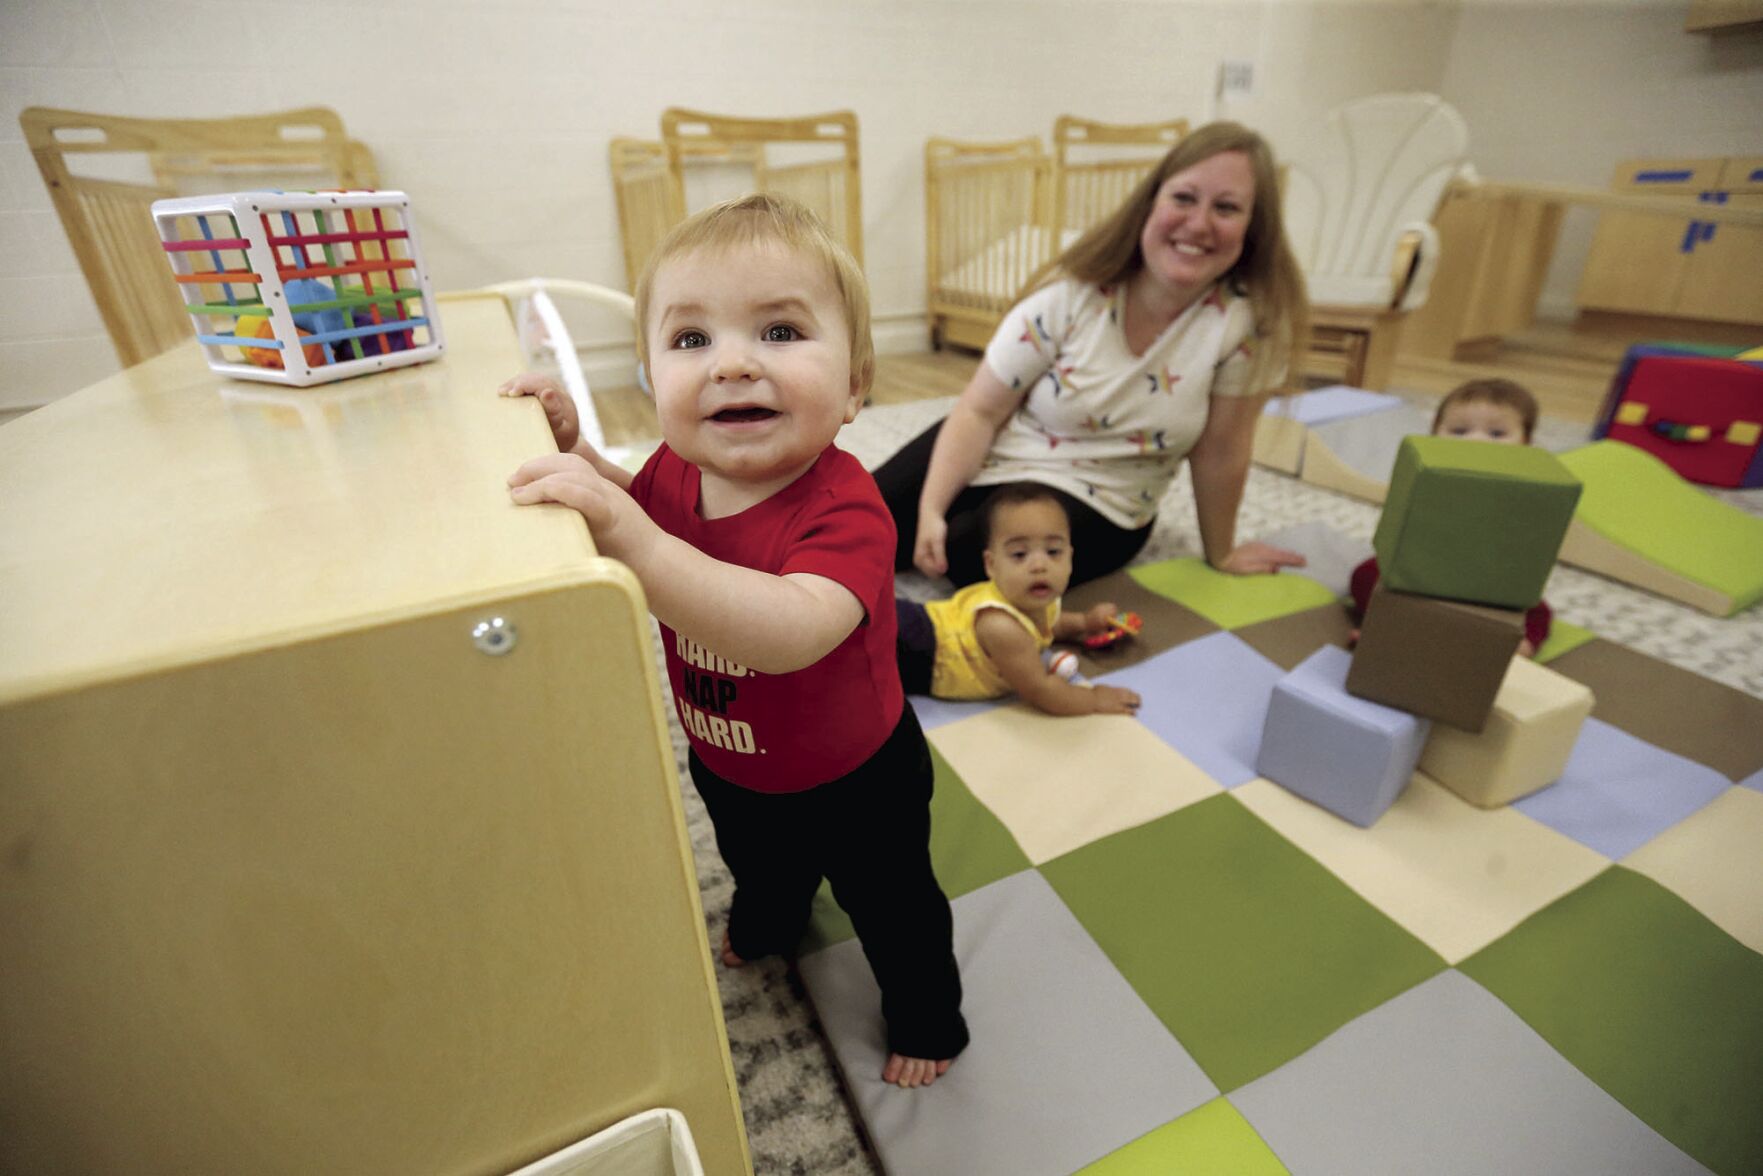 Sheena Gillen, lead infant teacher at Holy Ghost Early Childhood Center, plays with Nolan McCarthy (from left), Olivia Collins and Lexie Meyers at the center in Dubuque in September. City and business officials hope that several projects will lead to expanded child care availability.    PHOTO CREDIT: JESSICA REILLY, Telegraph Herald